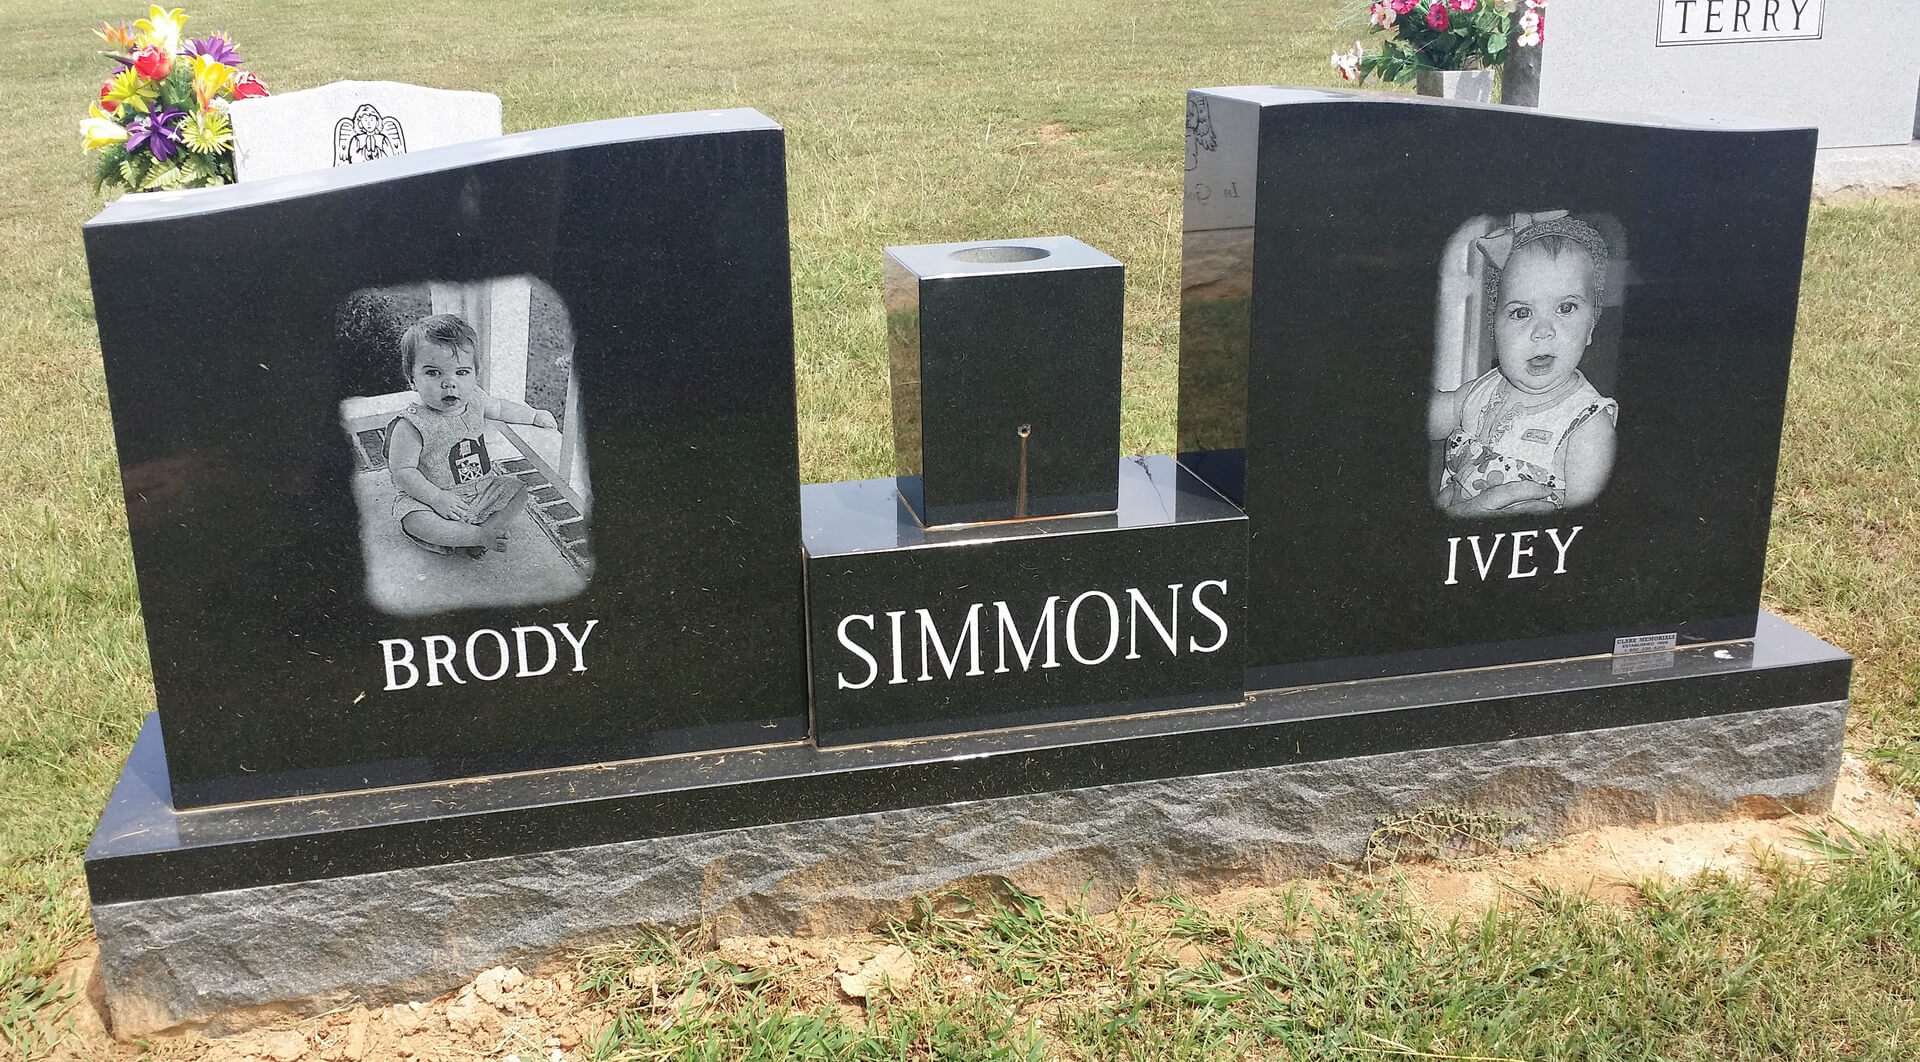 A memorial slab with the name Brody and Ivey Simmons